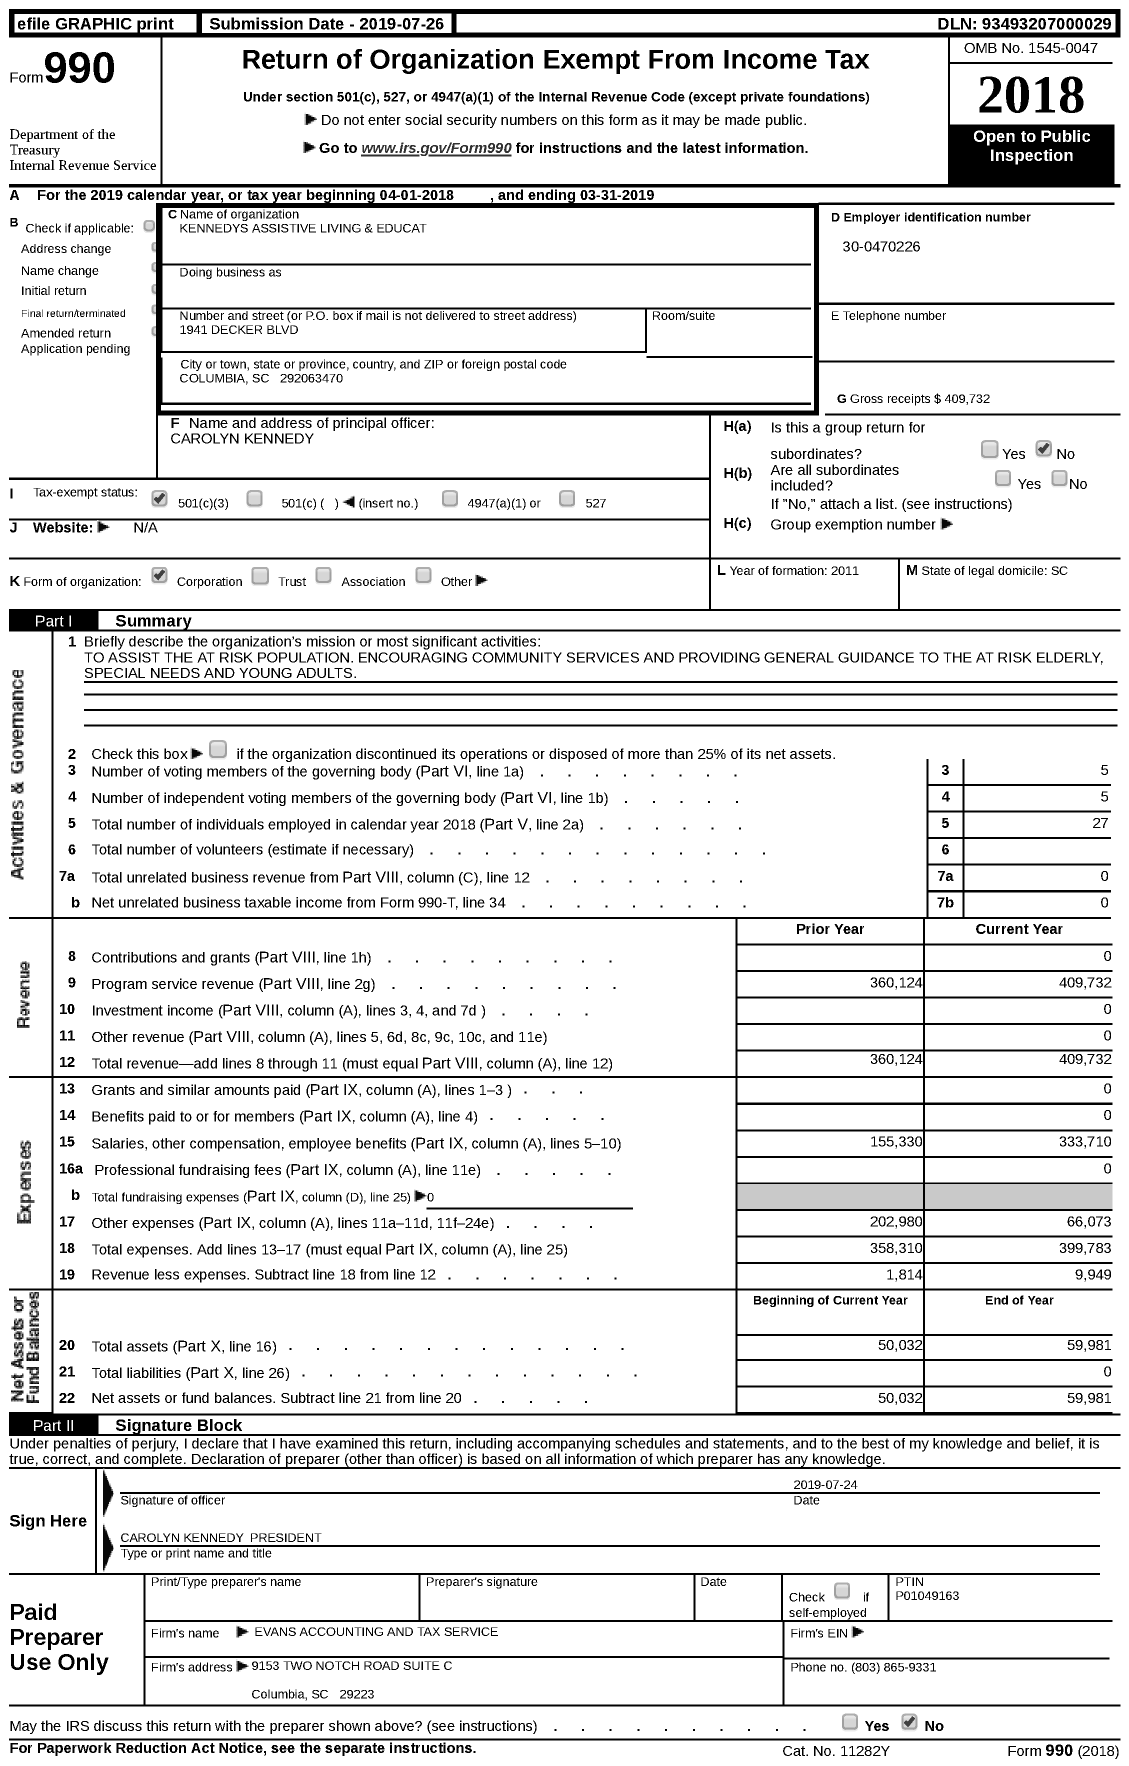 Image of first page of 2018 Form 990 for Kennedy's 'S Assistive Living and Education